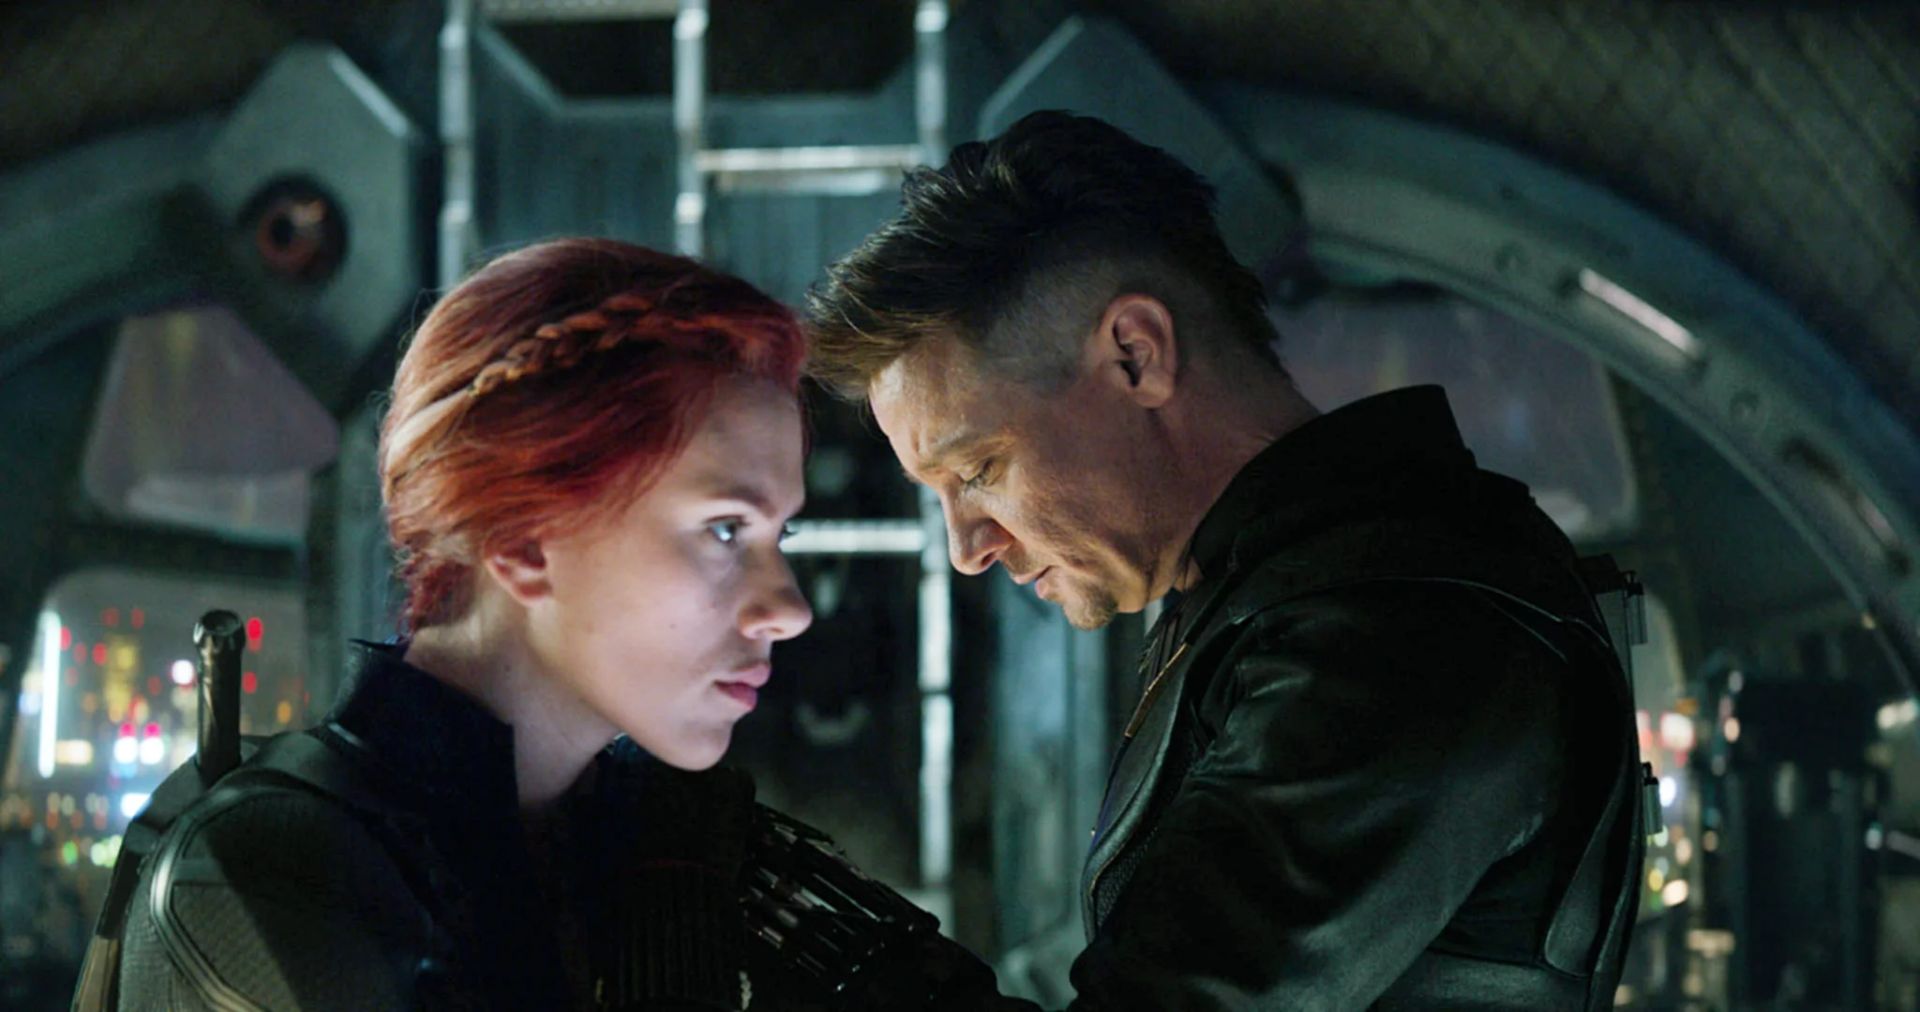 What do Clint and Natasha remember “Very differently”? 